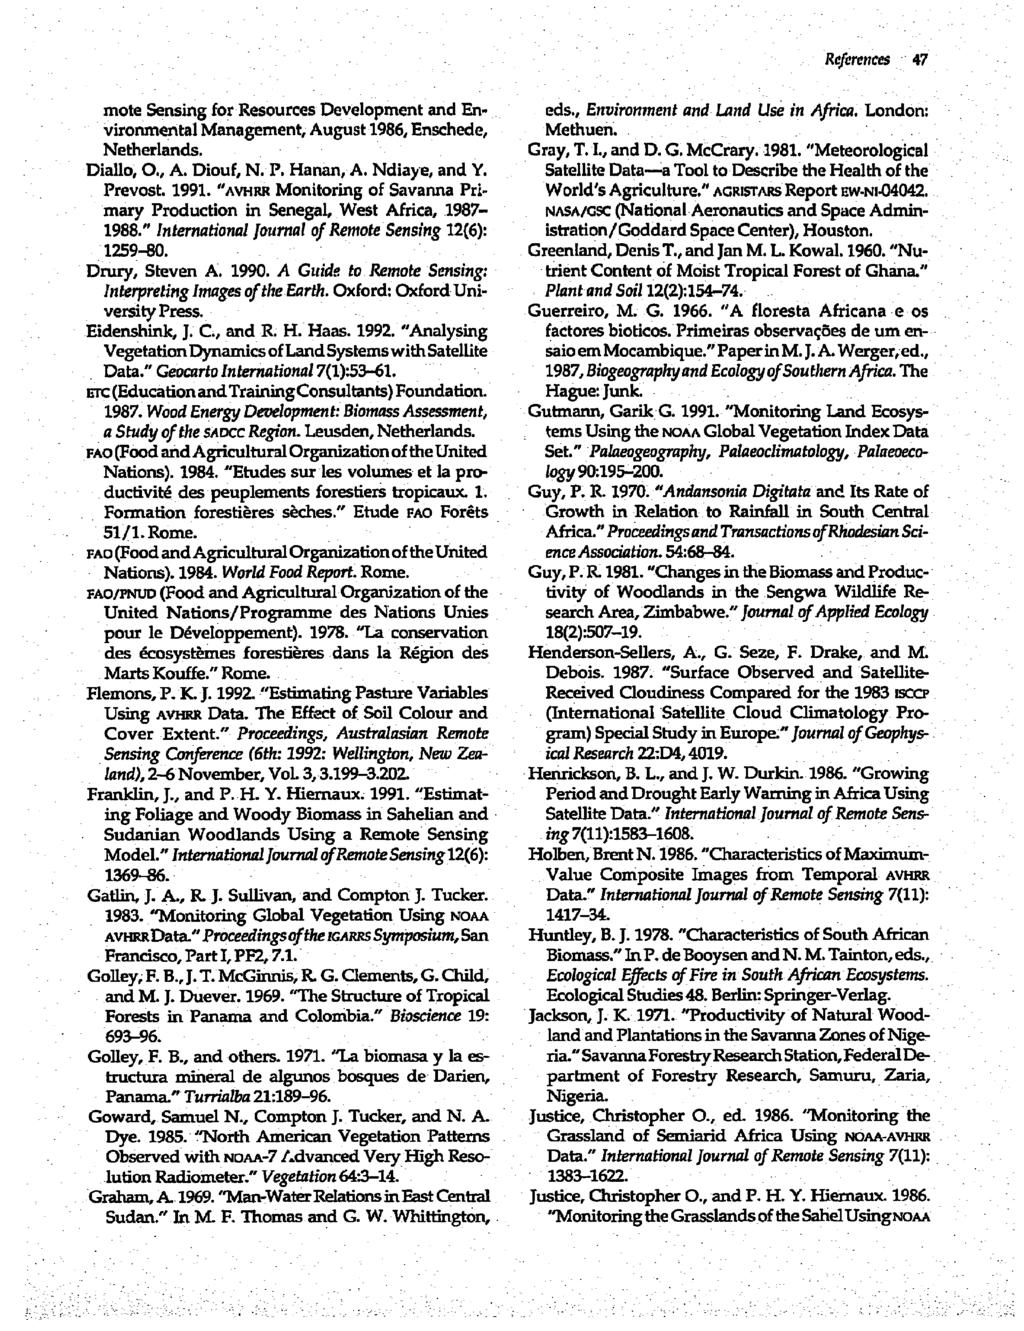 References 47 mote Sensing for Resources Developmnent and En- eds., Environmen t and Land Use in Africa. London: vironmnertal Management, August 1986, Enschede, Methuen. Netherlands. Gray, T. L., and D.